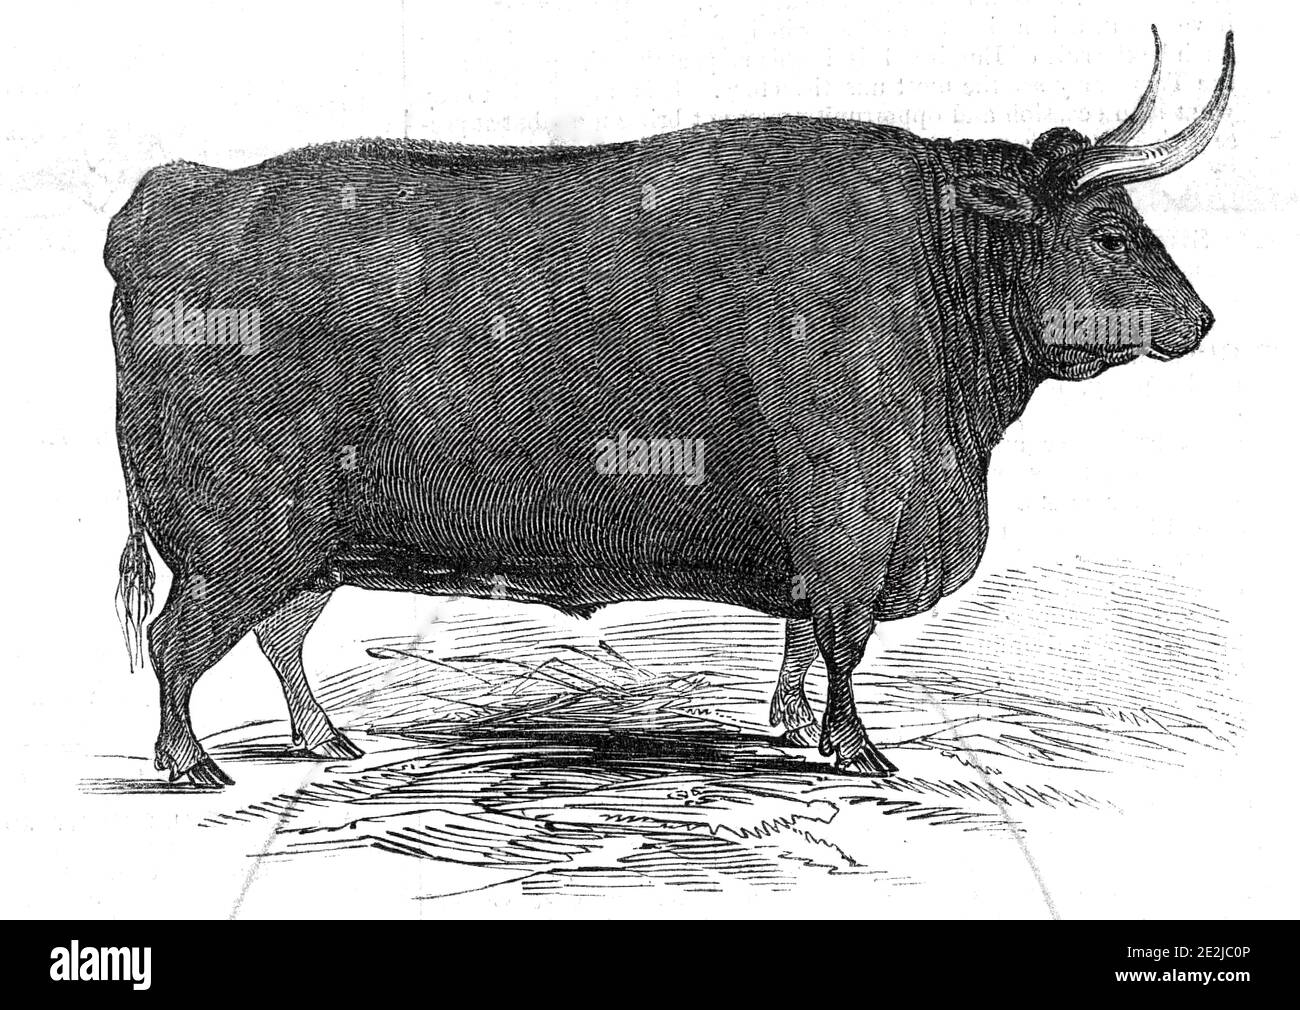 Mr. T. W. Fouracre's 3 yrs. 11 mo. old Devon steer - 1st prize, &#xa3;30 - second class - and silver medal, 1845. Livestock show organised by the Smithfield Club in London. From &quot;Illustrated London News&quot;, 1845, Vol VII. Stock Photo